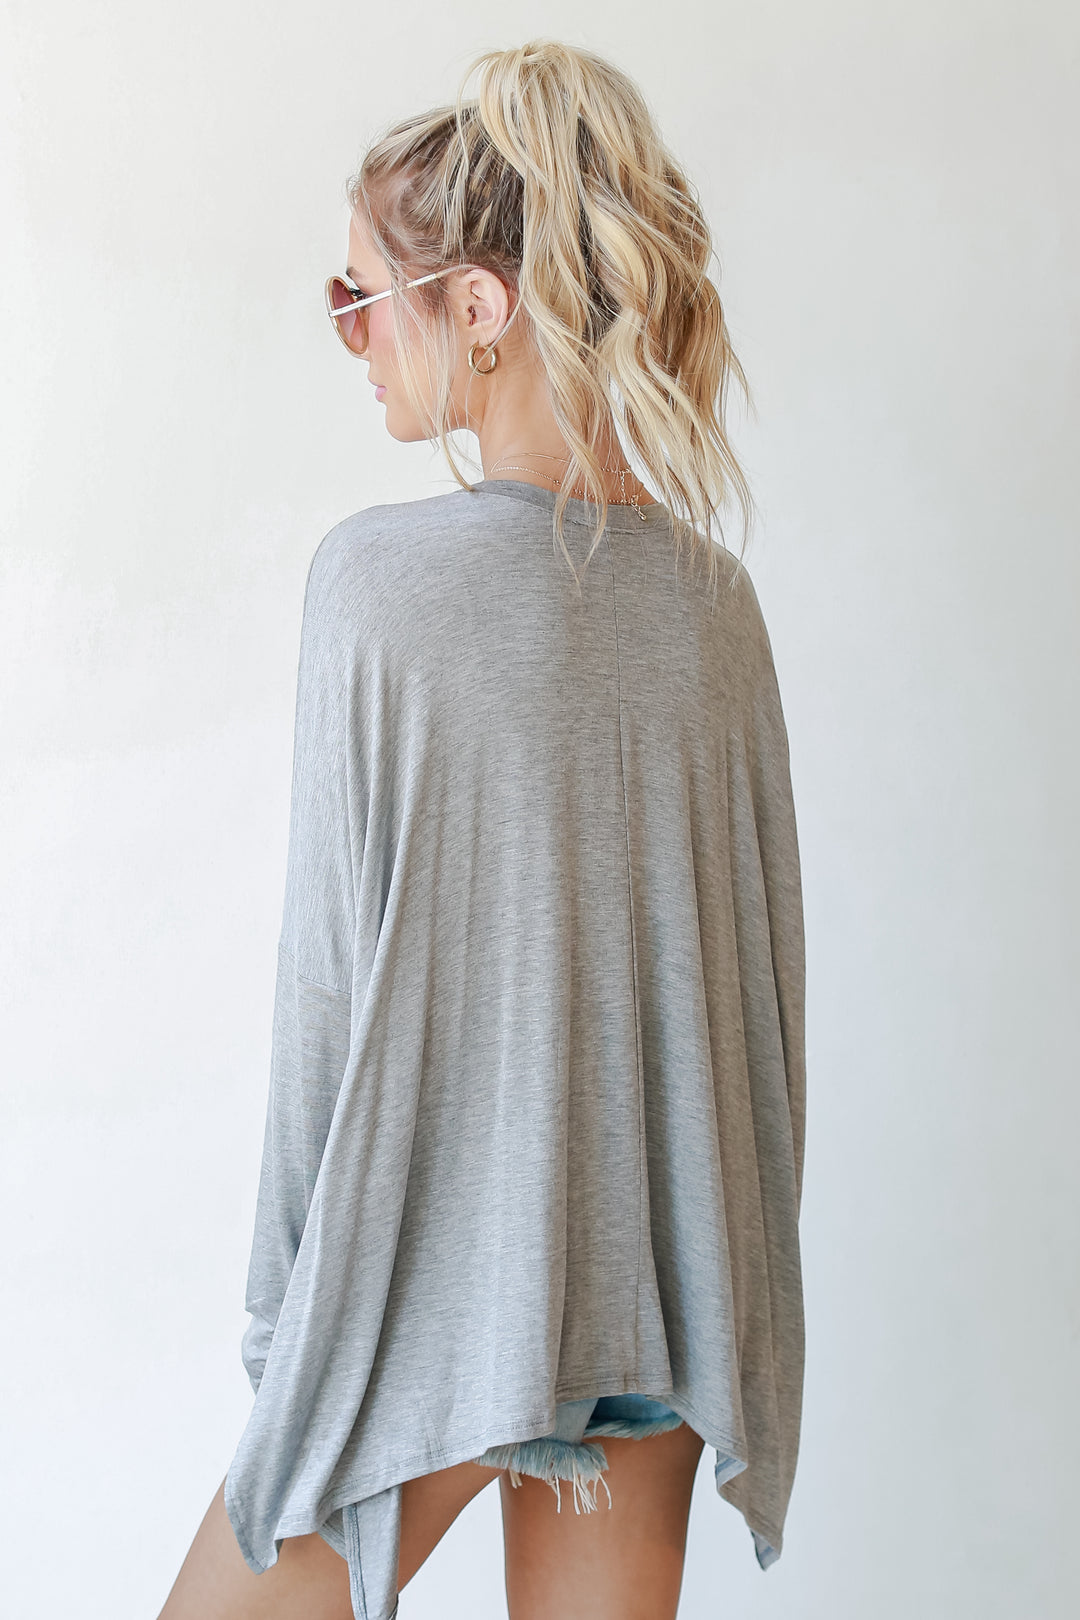 Oversized Jersey Knit Top in heather grey